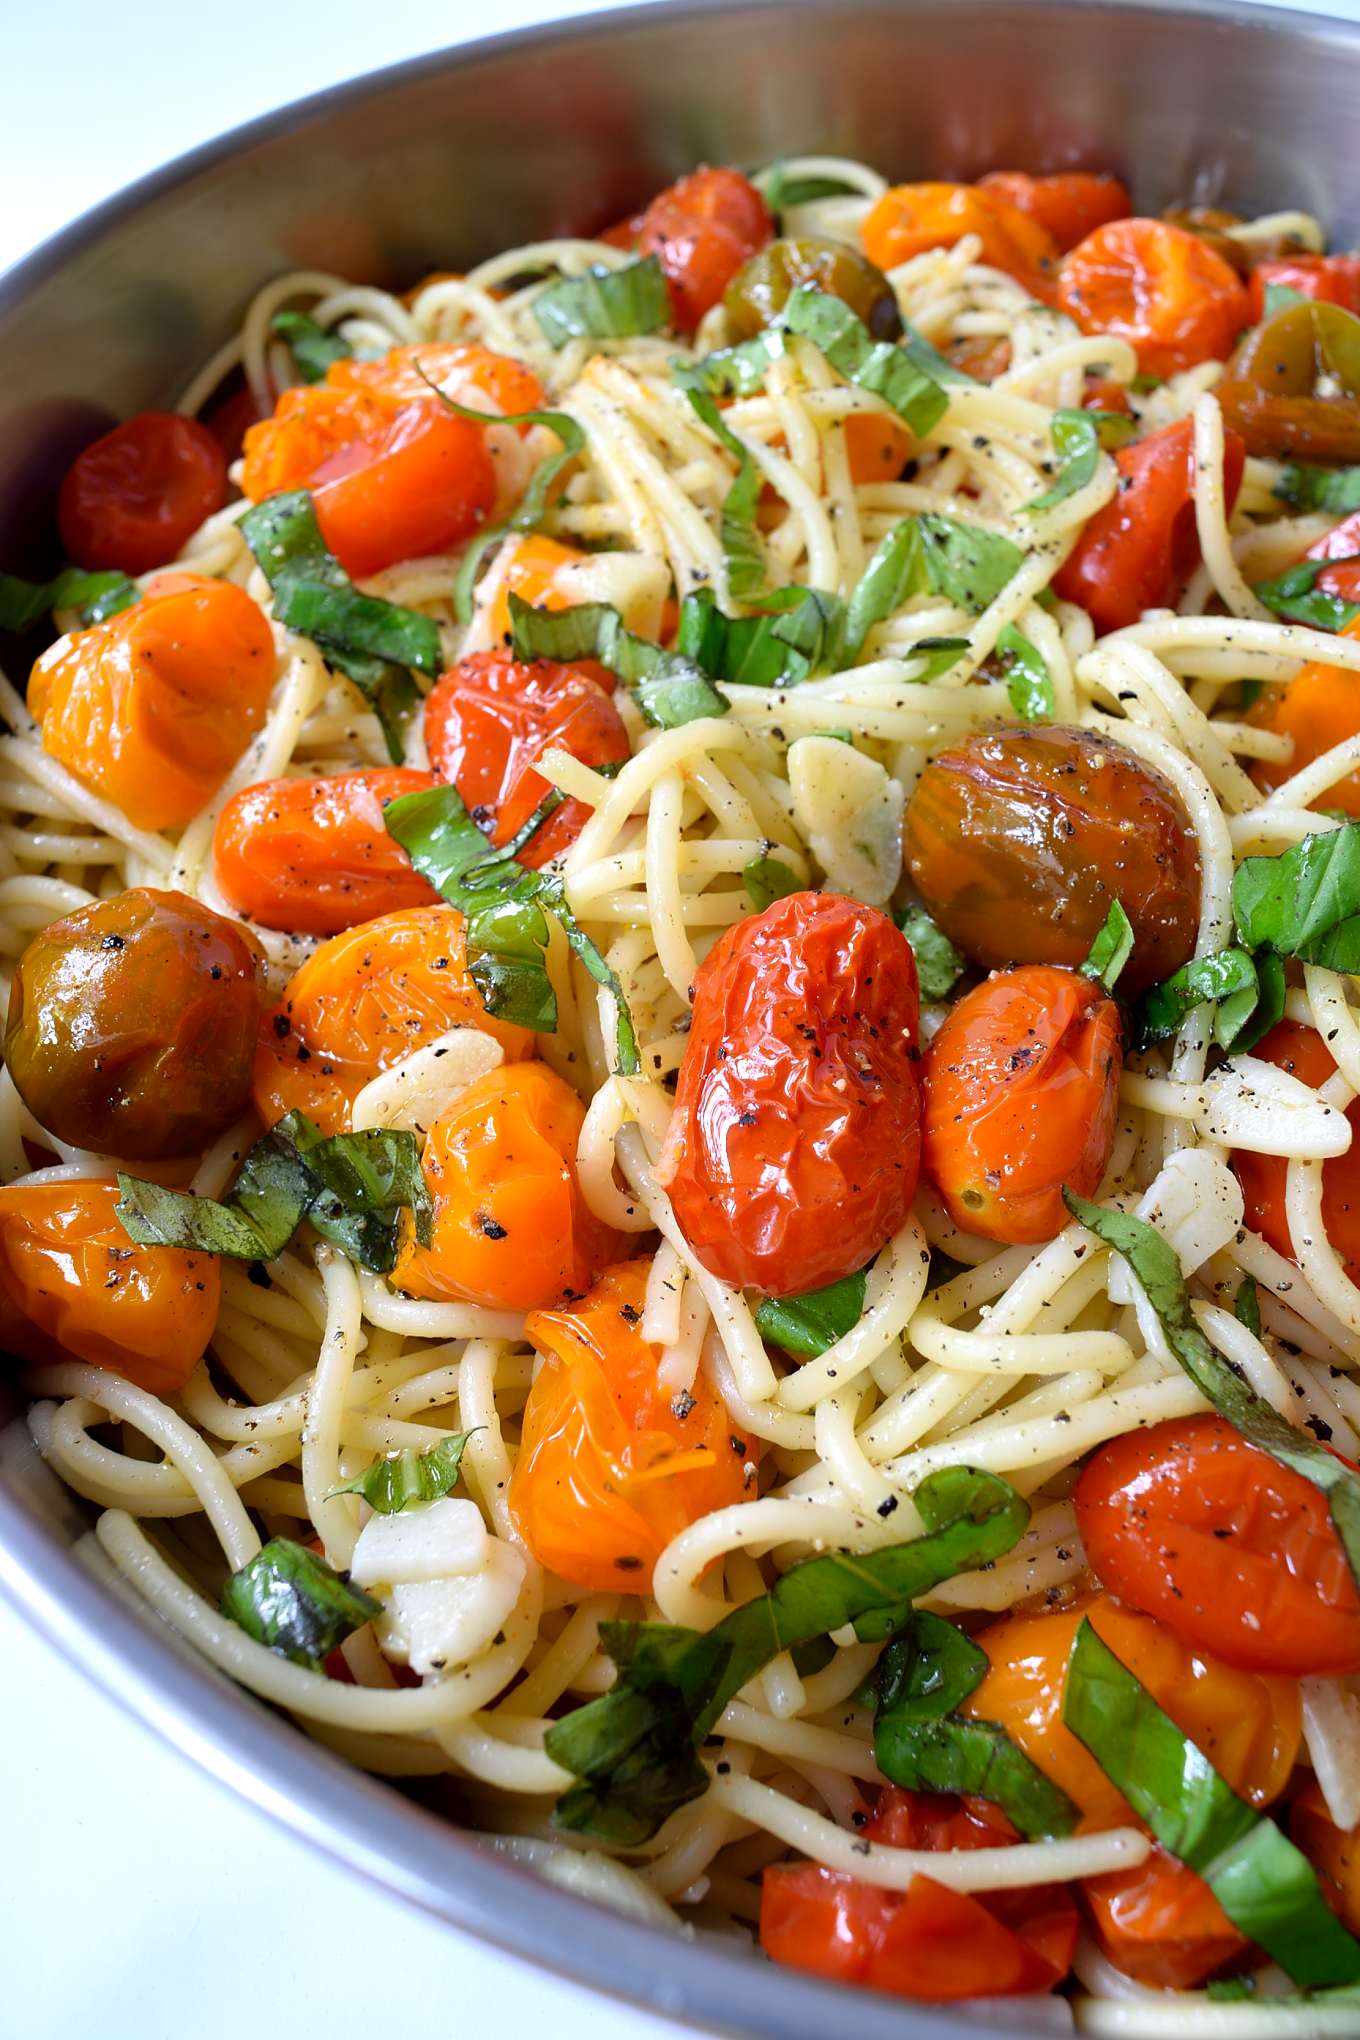 This recipe for vegan roasted tomato pasta with garlic and basil is so easy it could go under the category of cooking for dummies. Go ahead and try to stuff it up, I dare you. You’ll need a grand total of seven ingredients and just twenty-five minutes to get this simple and colourful dish on the table.